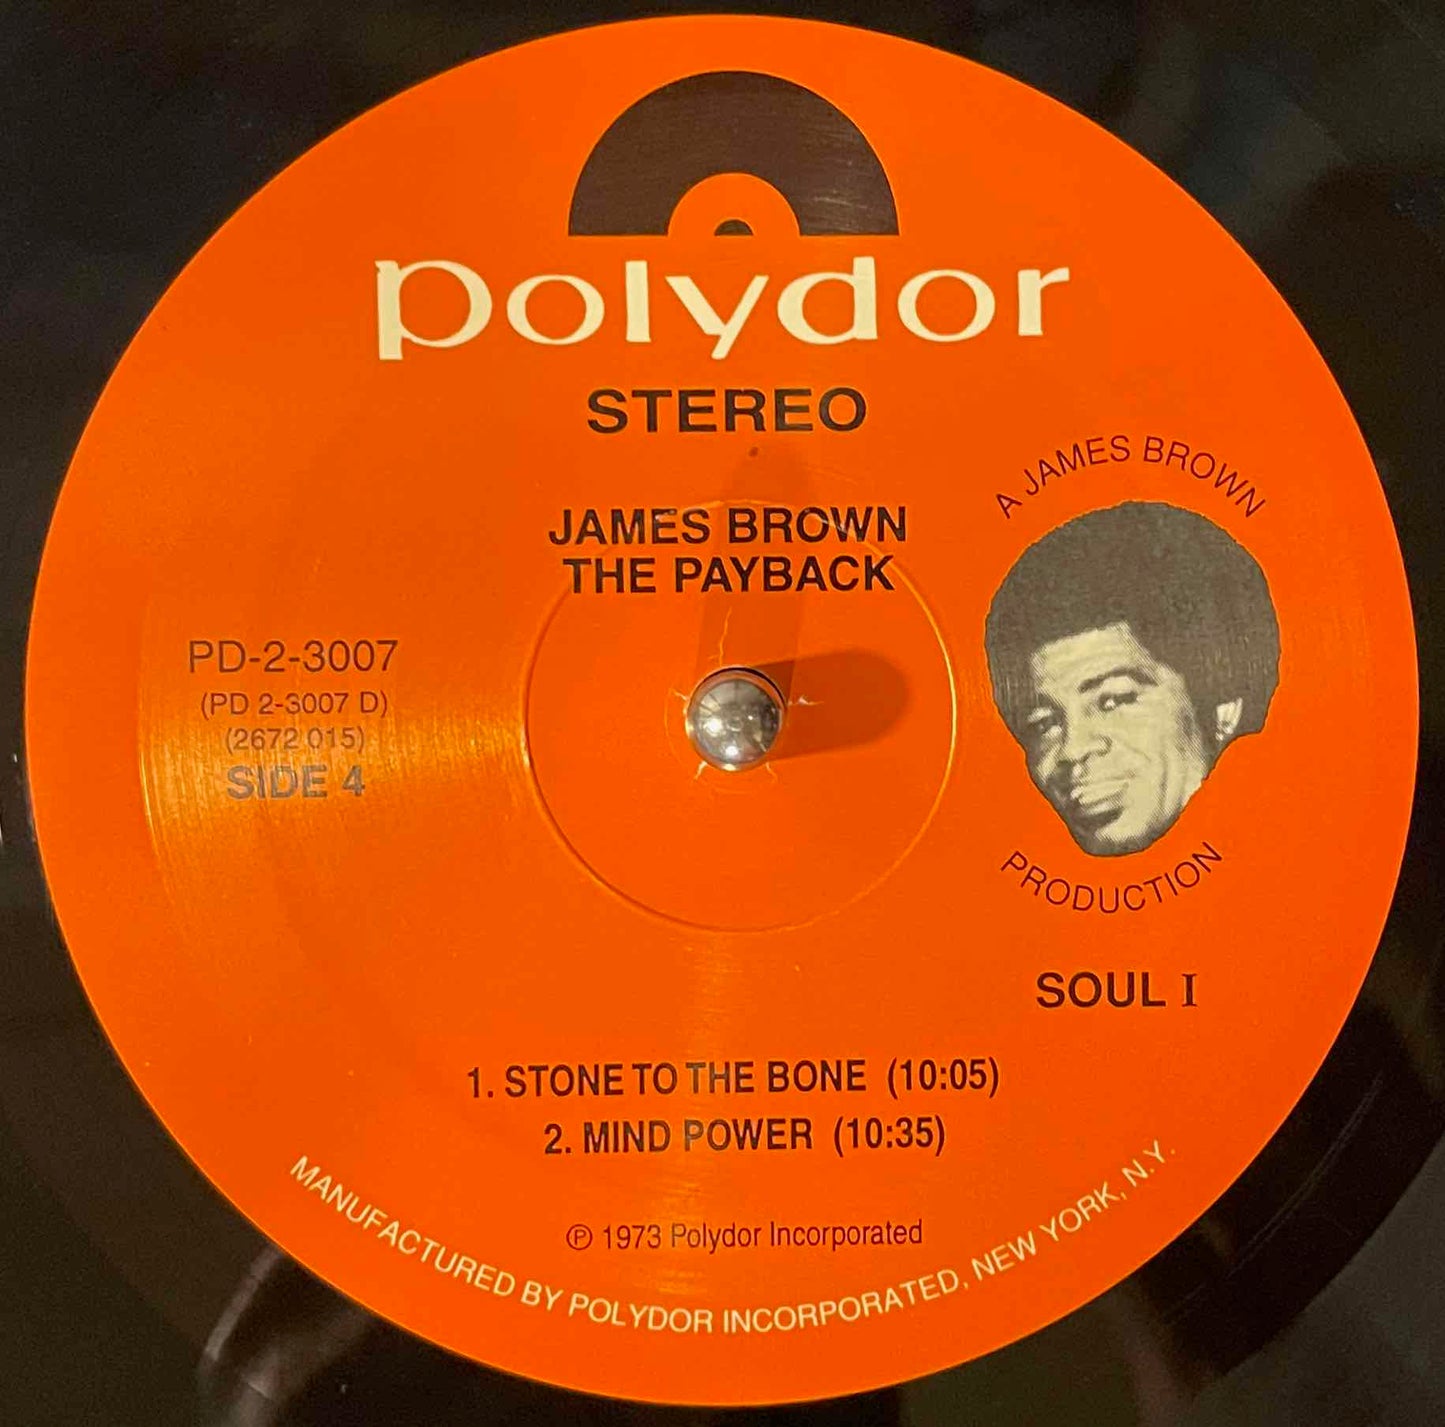 James Brown – The Payback LP label image side 4